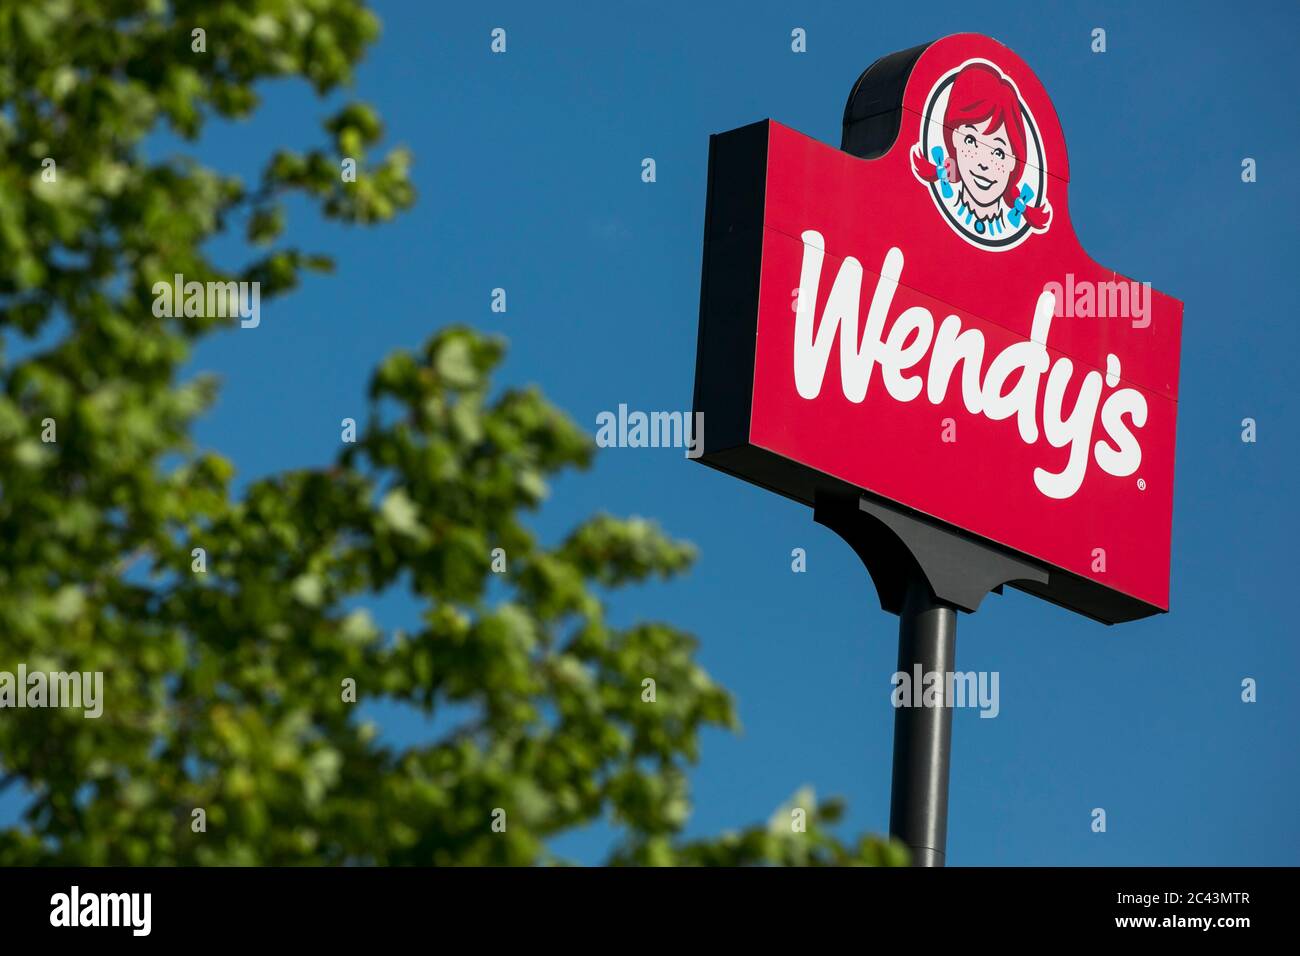 A logo sign outside of a Wendy's restaurant location in Hagerstown, Maryland on June 10, 2020. Stock Photo